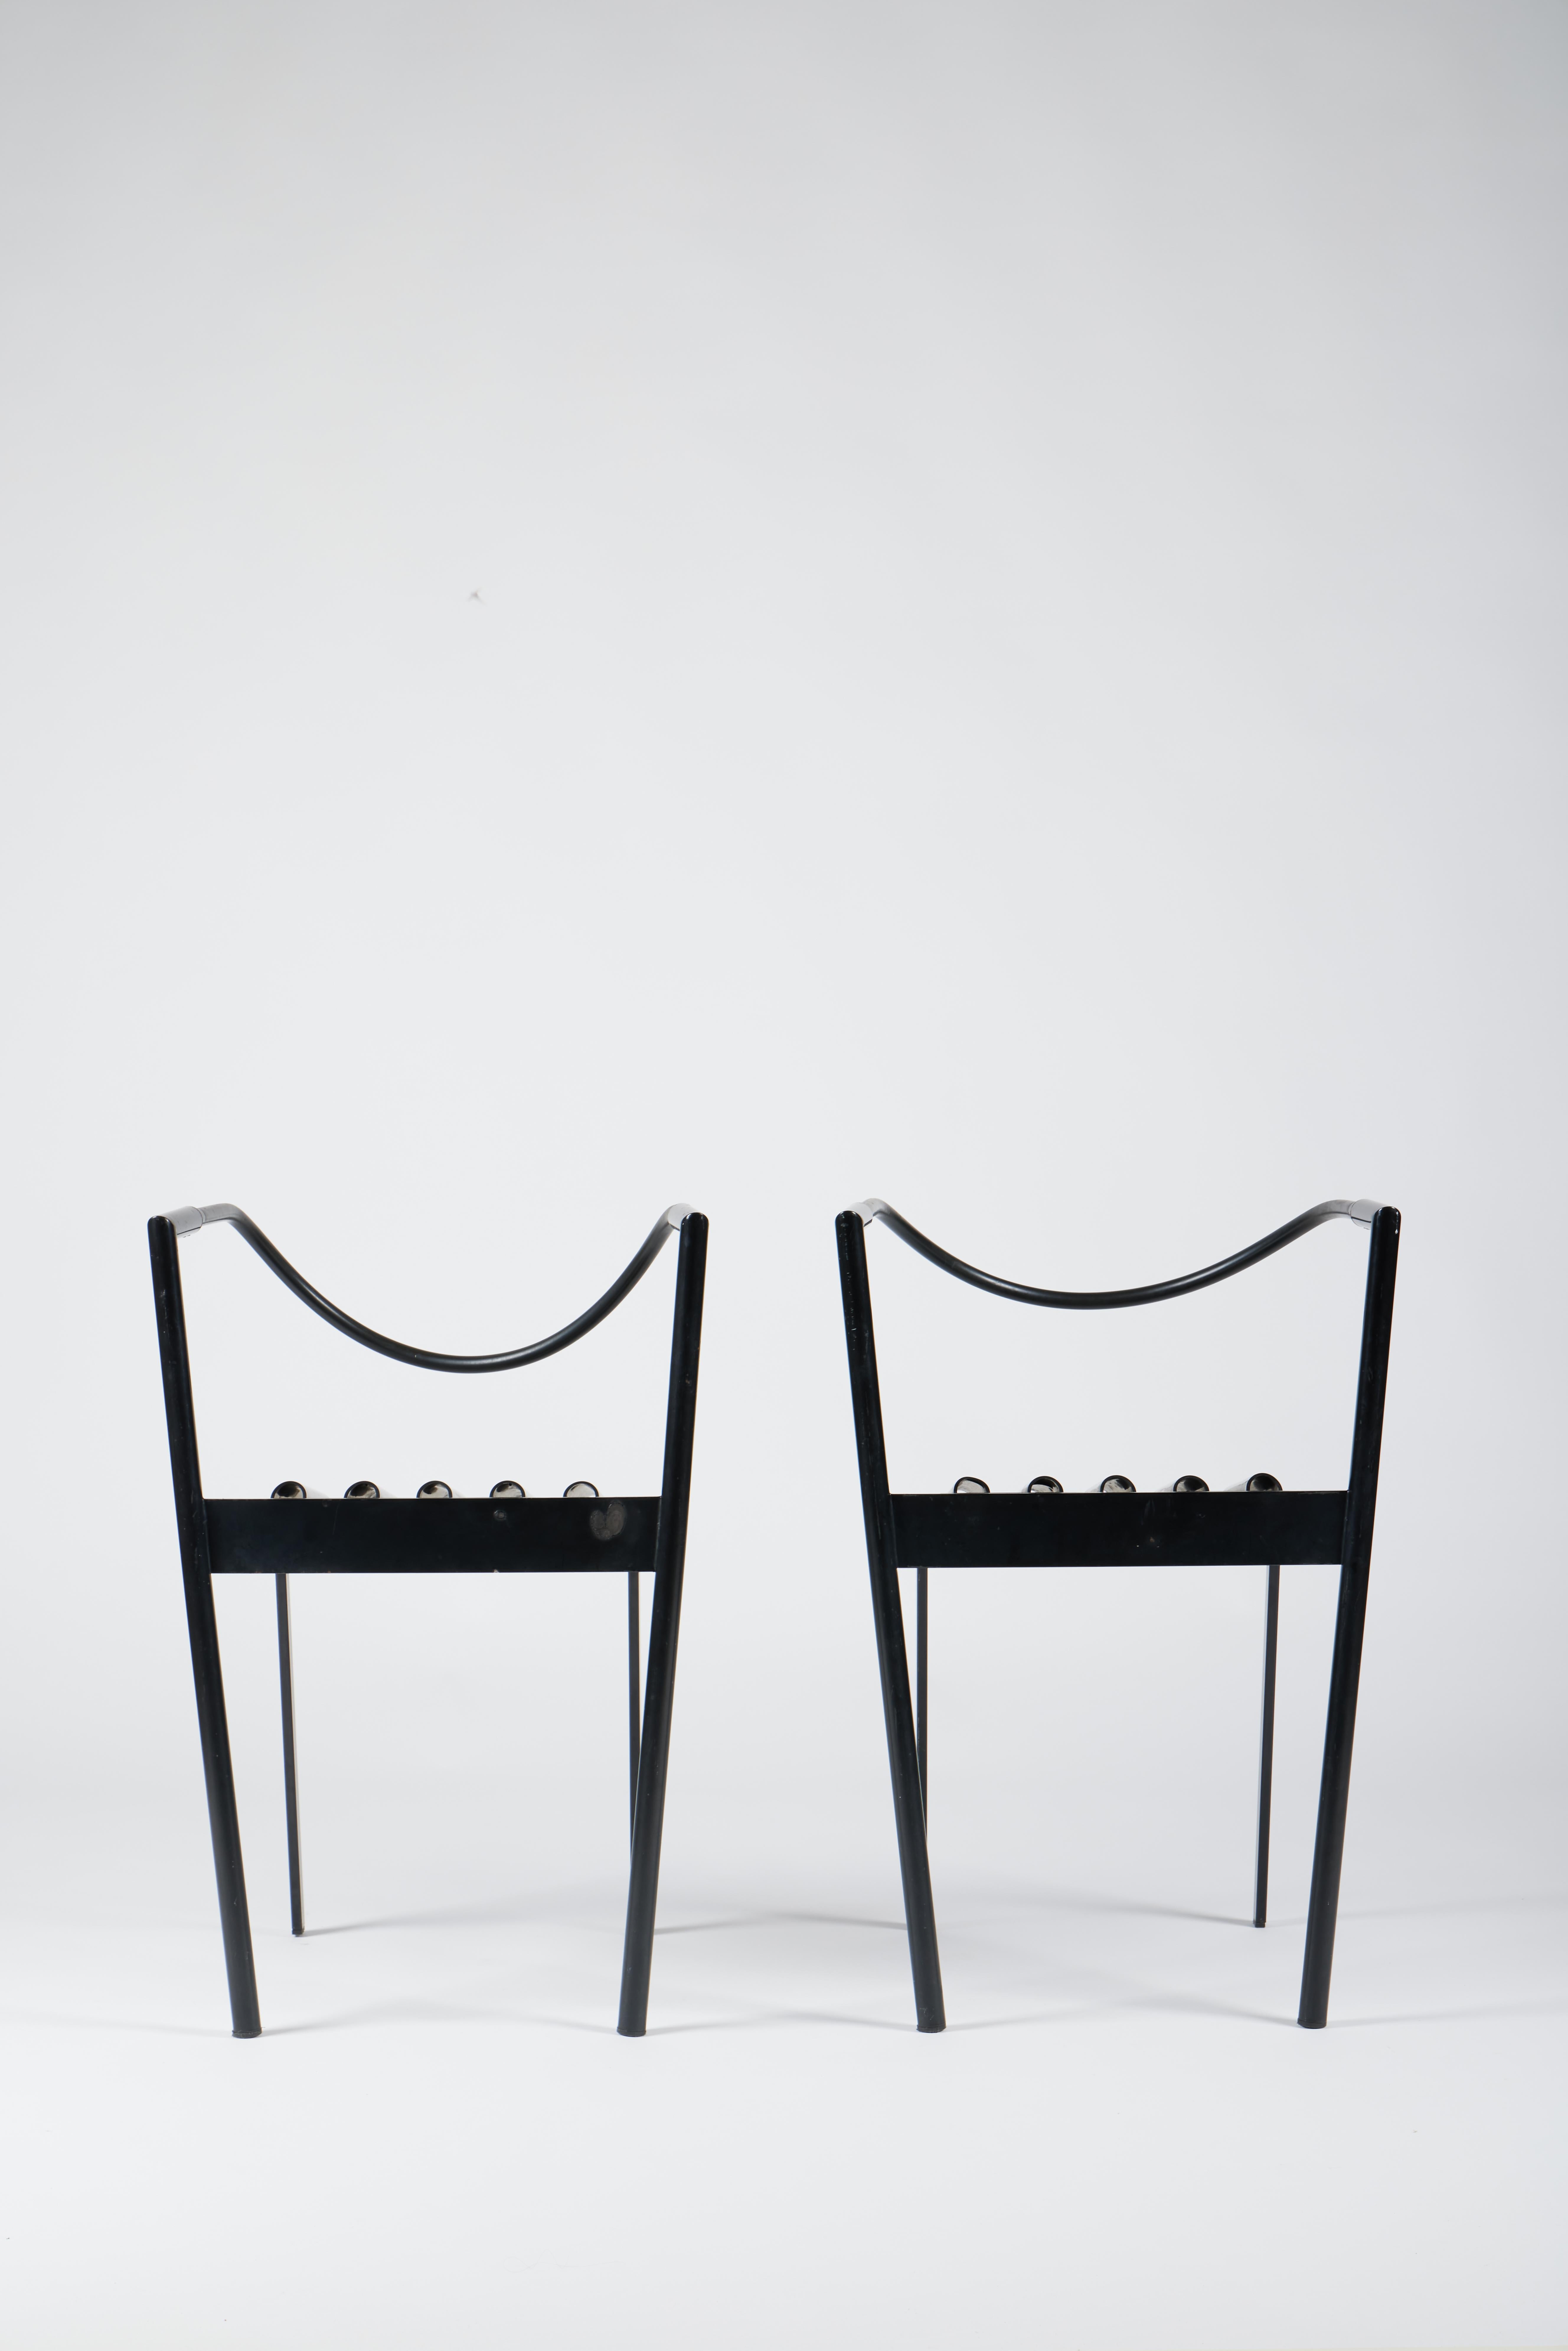 Paolo Pallucco and Mireille Rivier set of 2 Hans e Alice chairs, 1986

Very rare set of 2 Hans e Alice chairs by Paolo Pallucco and Mireille Rivier in black lacquered steel and rubber. 

The Italian designer Paolo Pallucco, founded the design firm